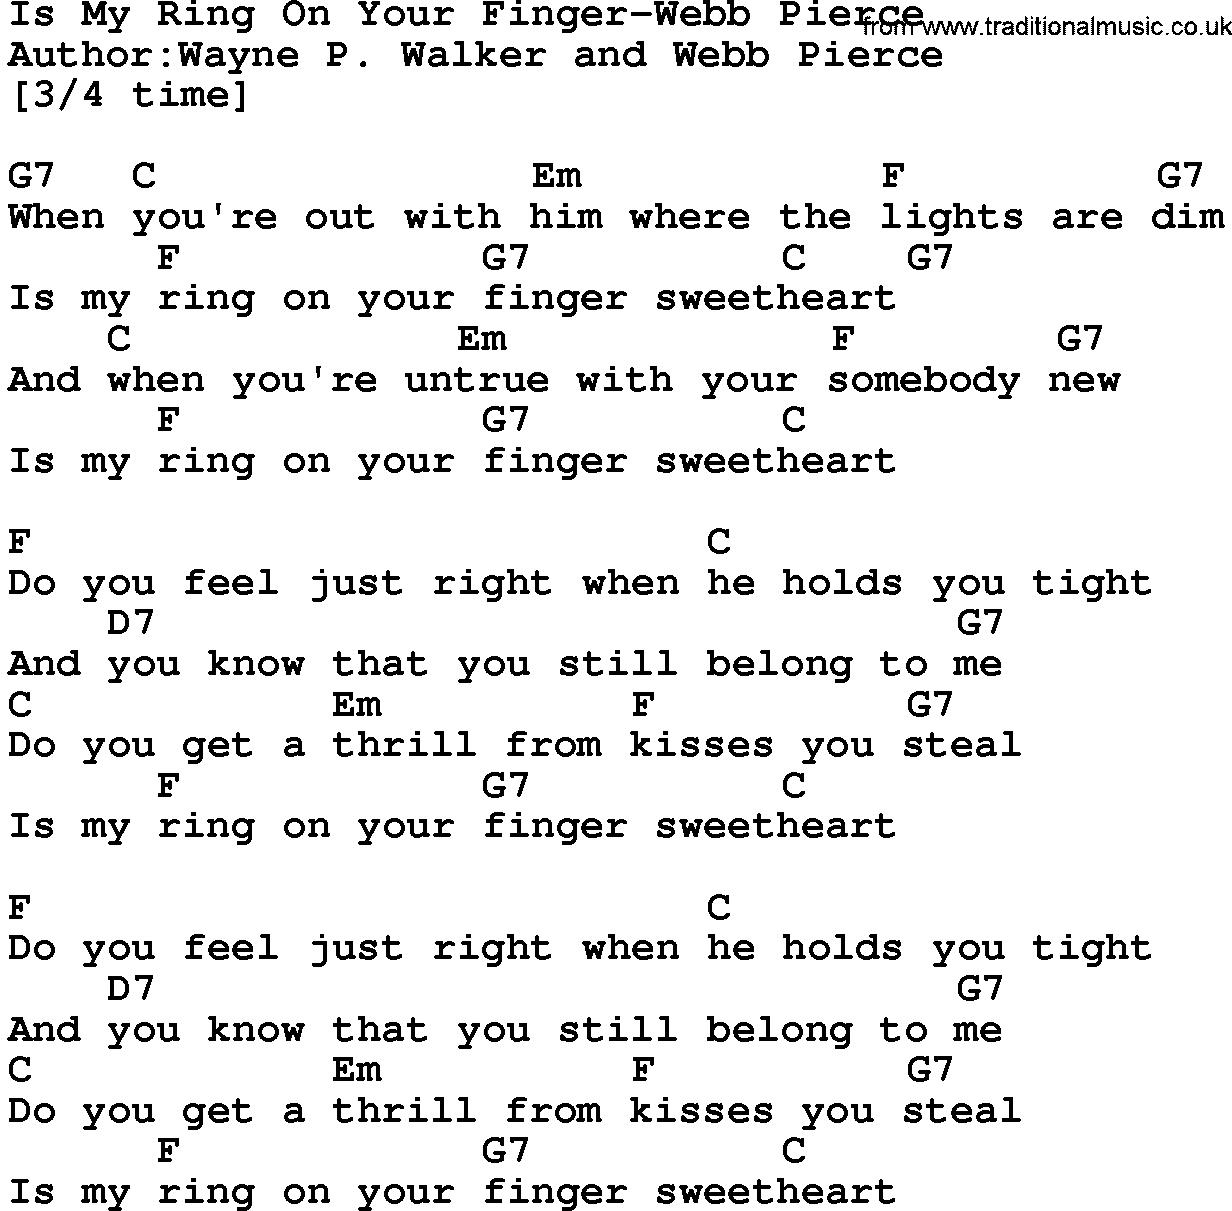 Country music song: Is My Ring On Your Finger-Webb Pierce lyrics and chords